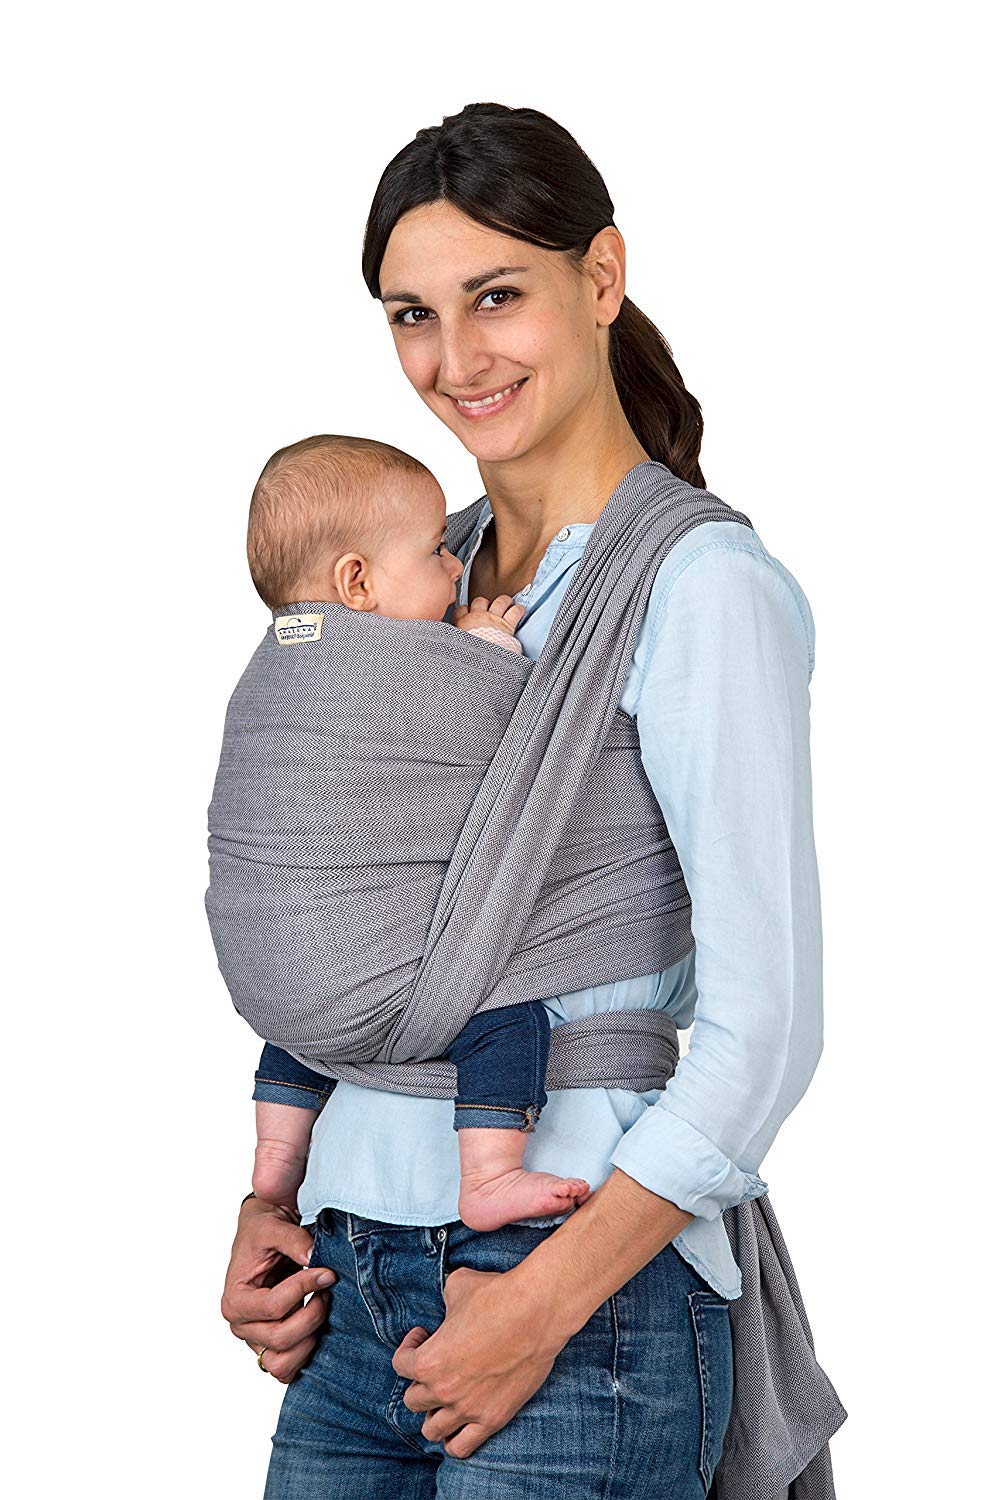 AMAZONAS Baby Sling Carry Sling Grey - Test Winner at Stiftung Warentest with Top Score 1.7-510 cm 0-3 Years to 15 kg in Grey